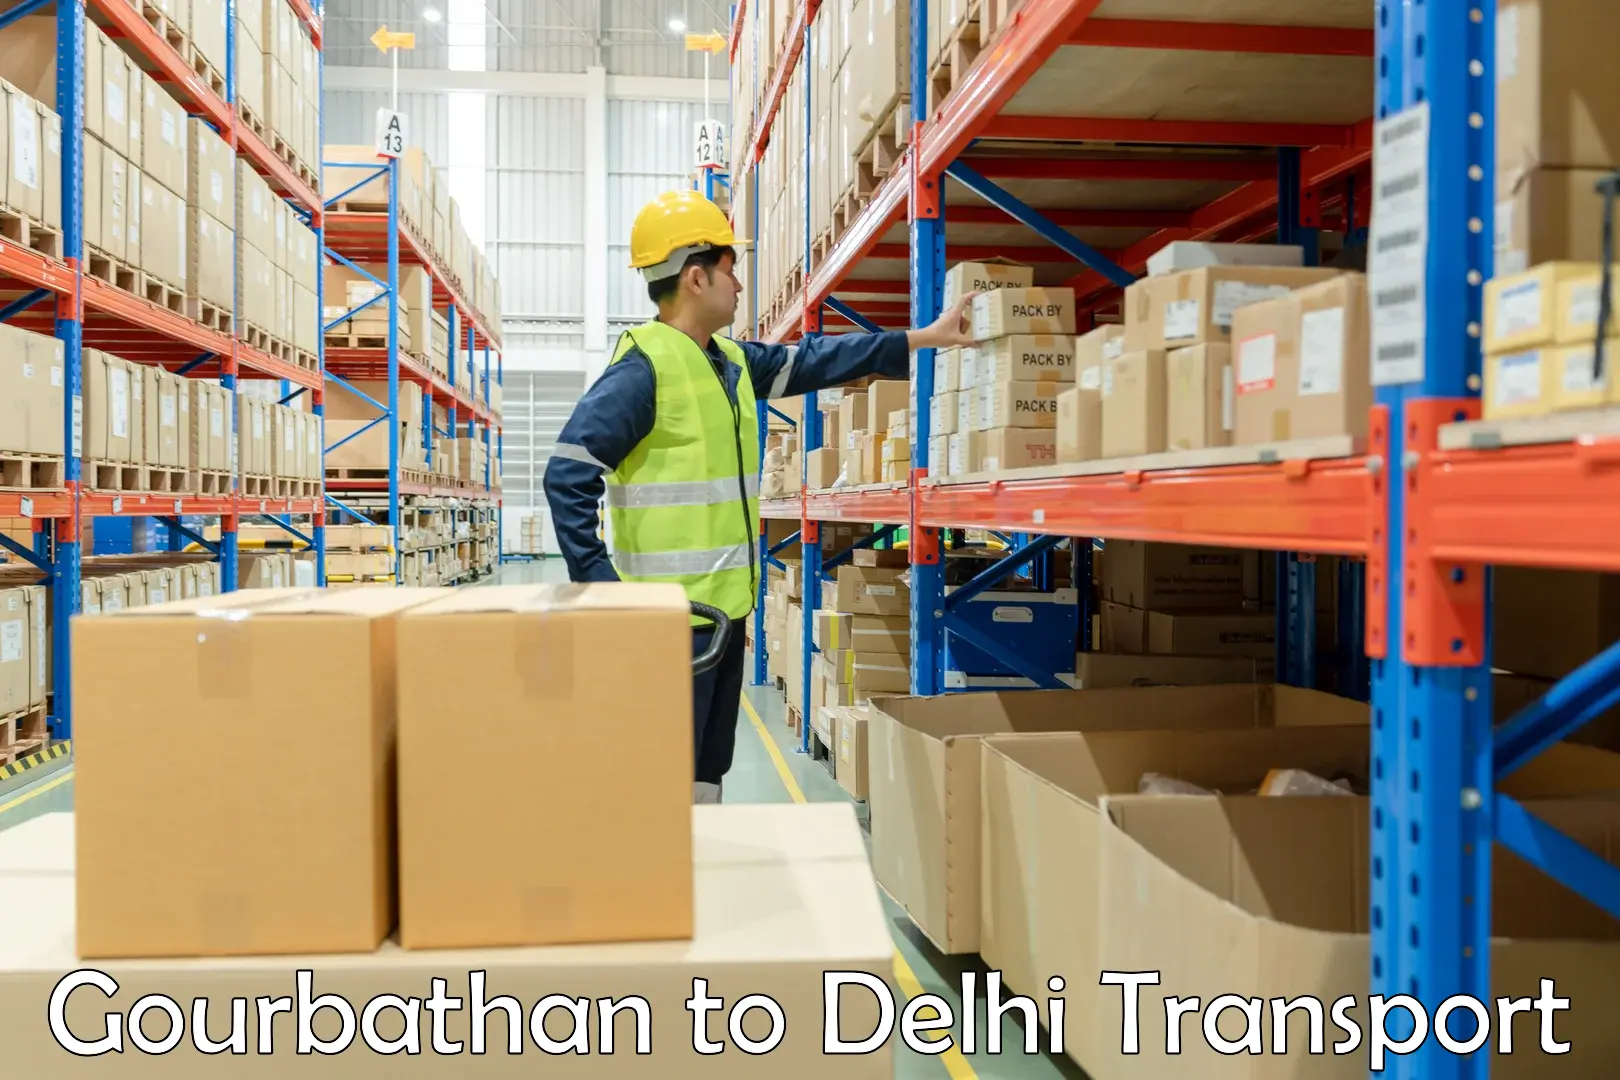 Truck transport companies in India Gourbathan to Lodhi Road